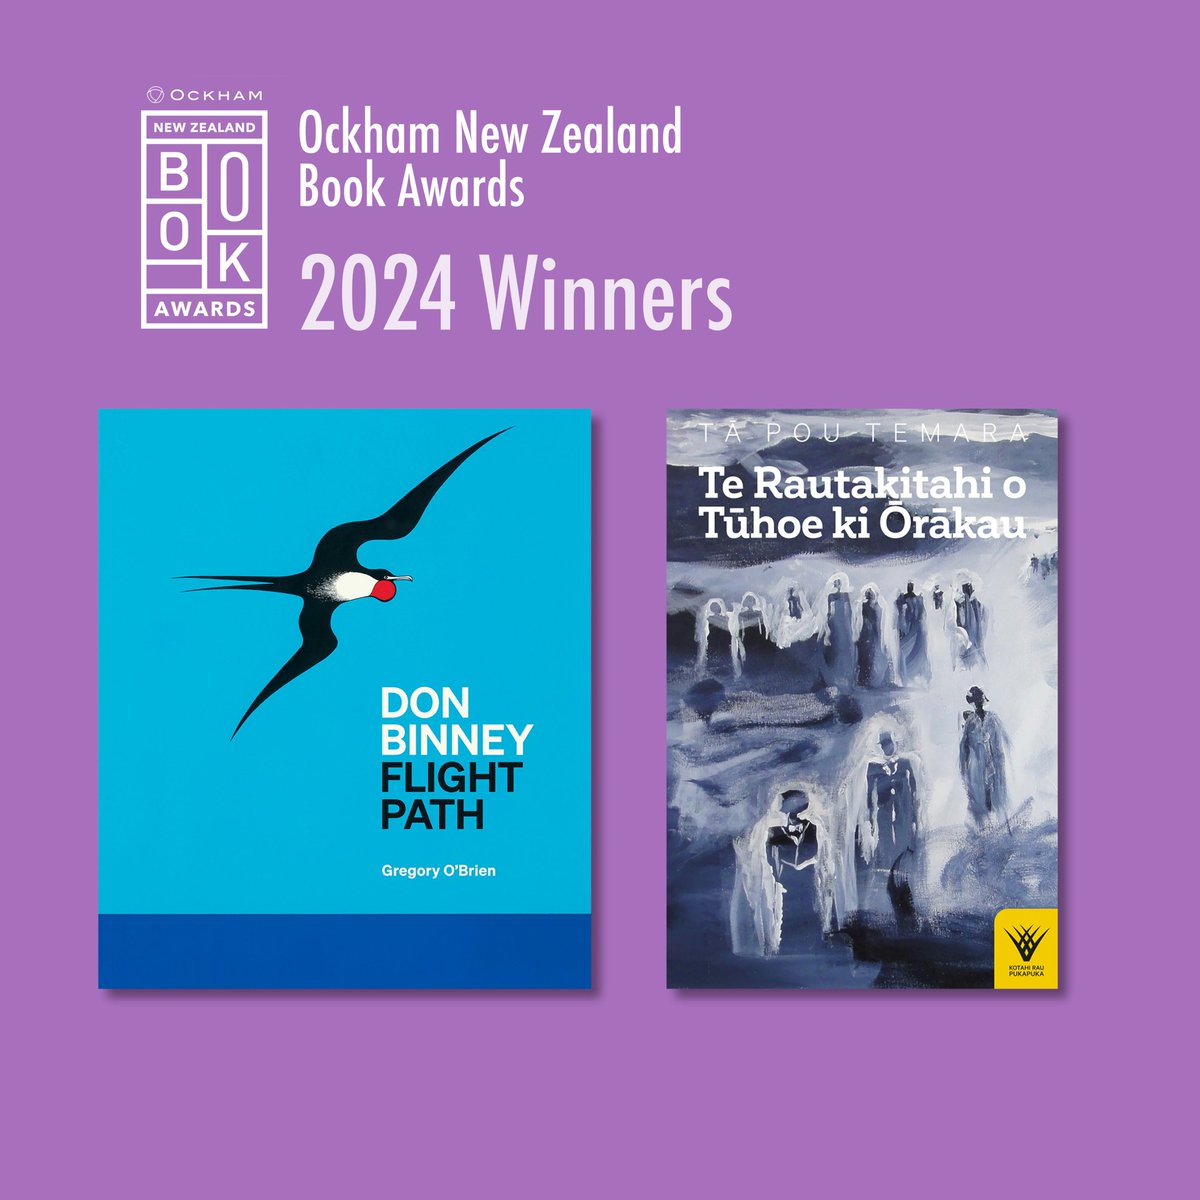 Congratulations to Tā Pou Temara and Gregory O’Brien for both taking home awards last night from the 2024 Ockham New Zealand Book Awards! nzbookawards.nz/new-zealand-bo… @theockhams